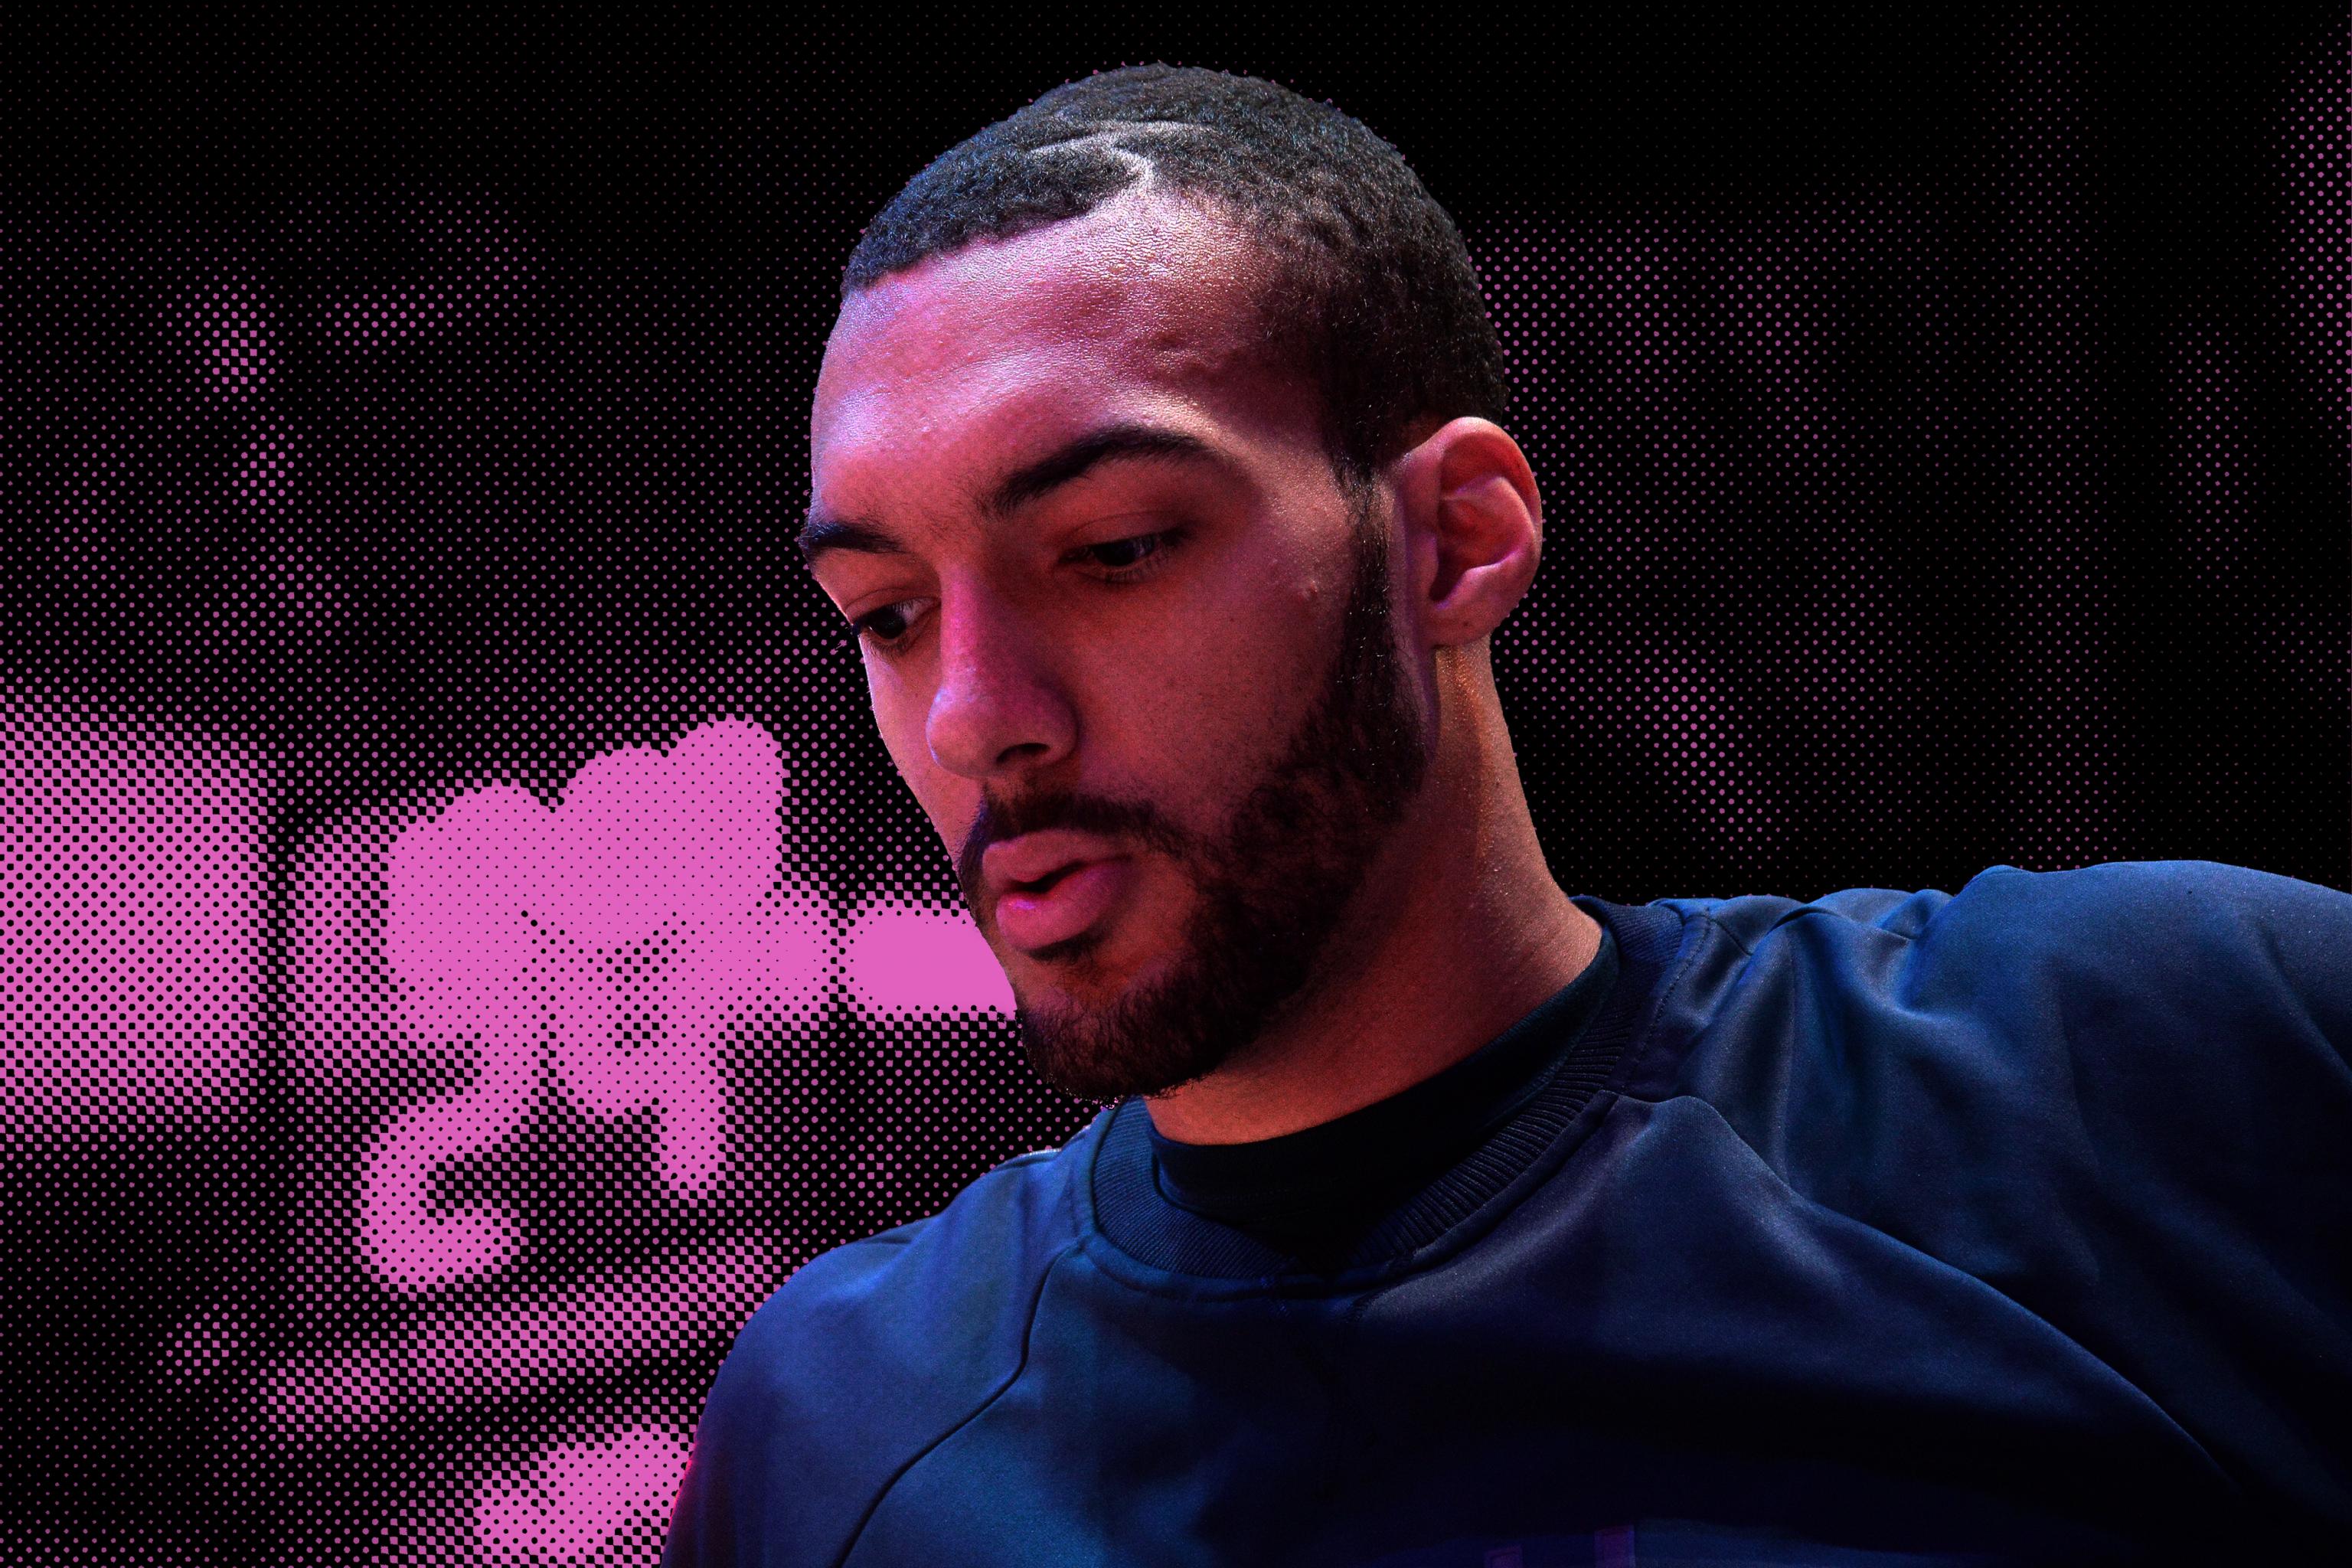 Is Rudy Gobert on pace to be the greatest French ball player of